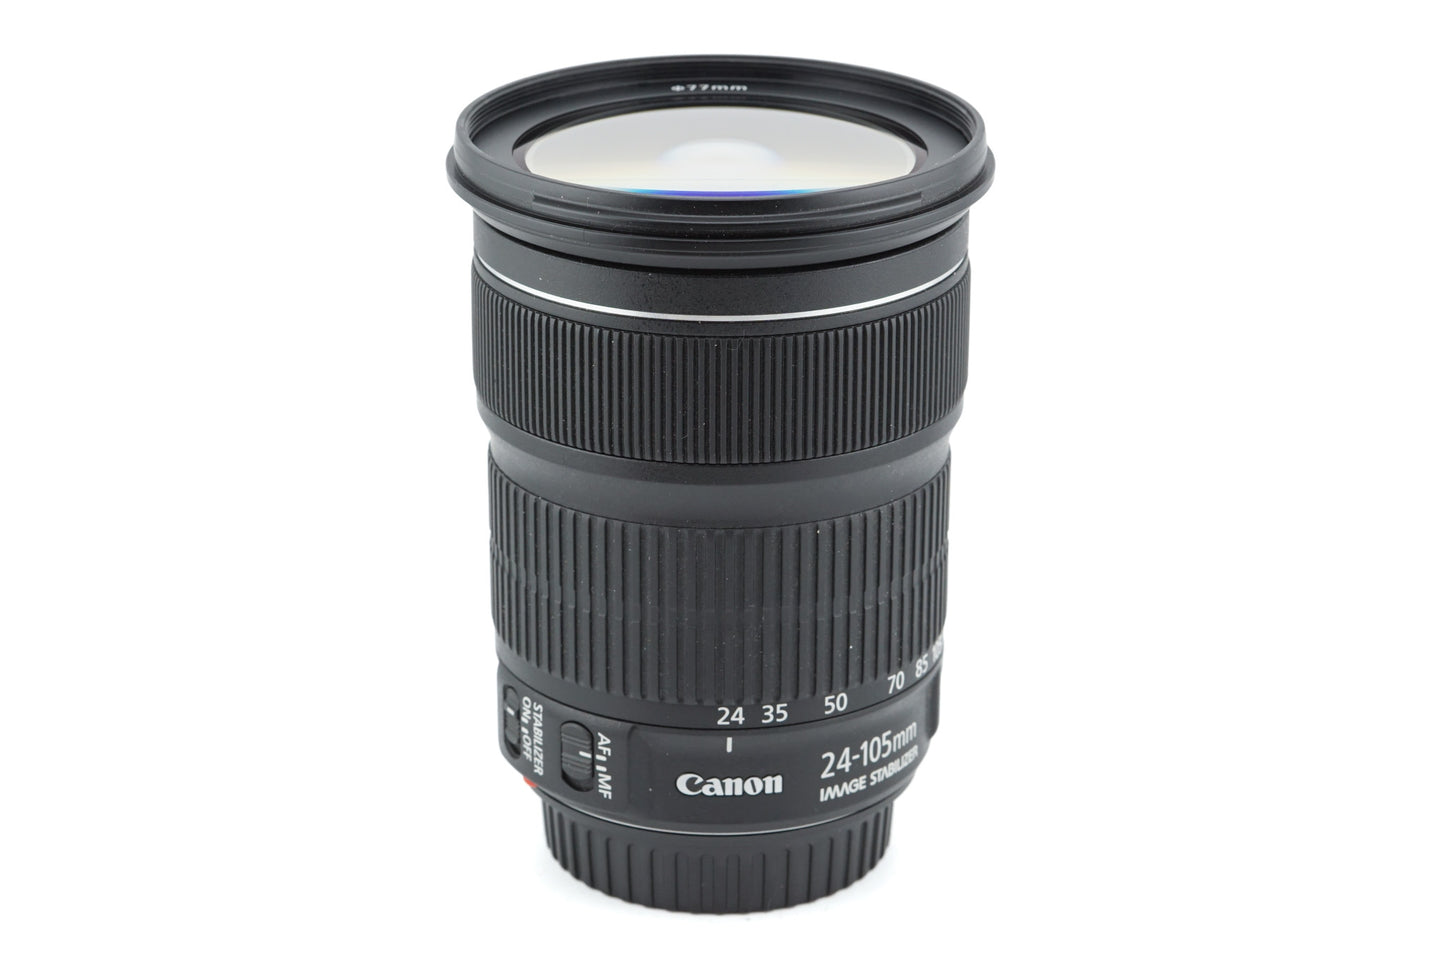 Canon 24-105mm f3.5-5.6 IS STM - Lens